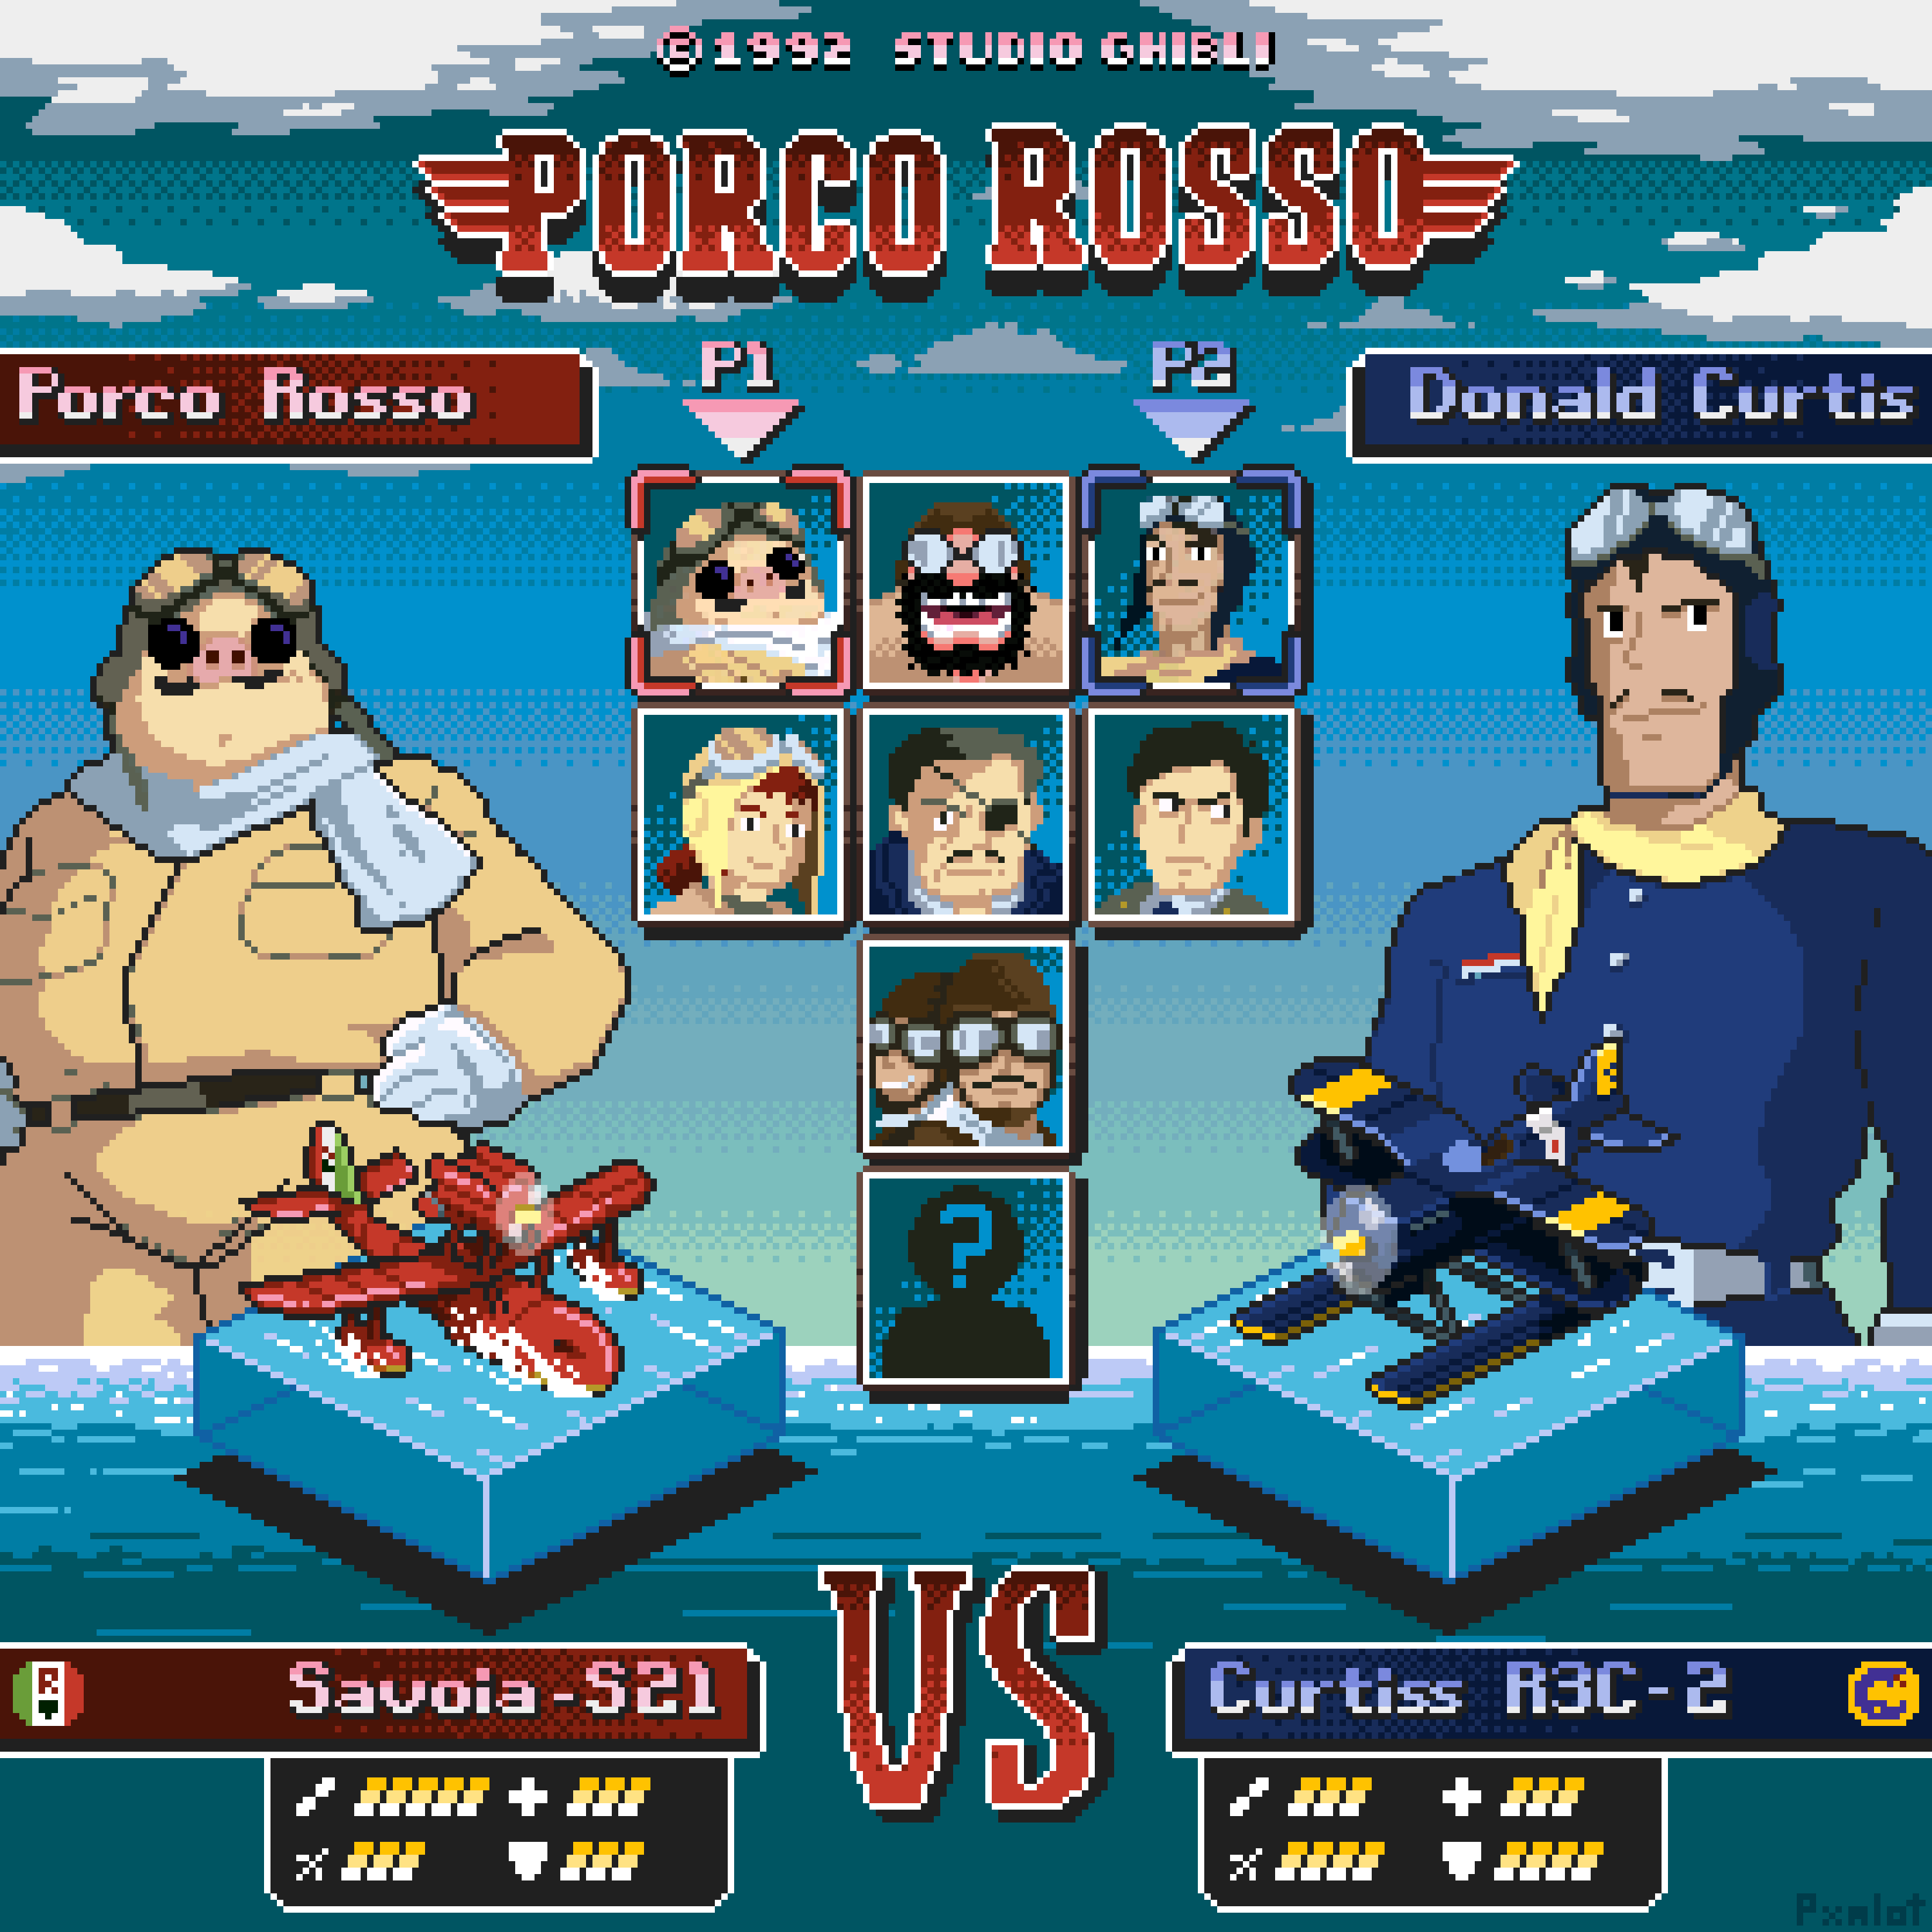 Porco Rosso re-imagined as an old school videogame